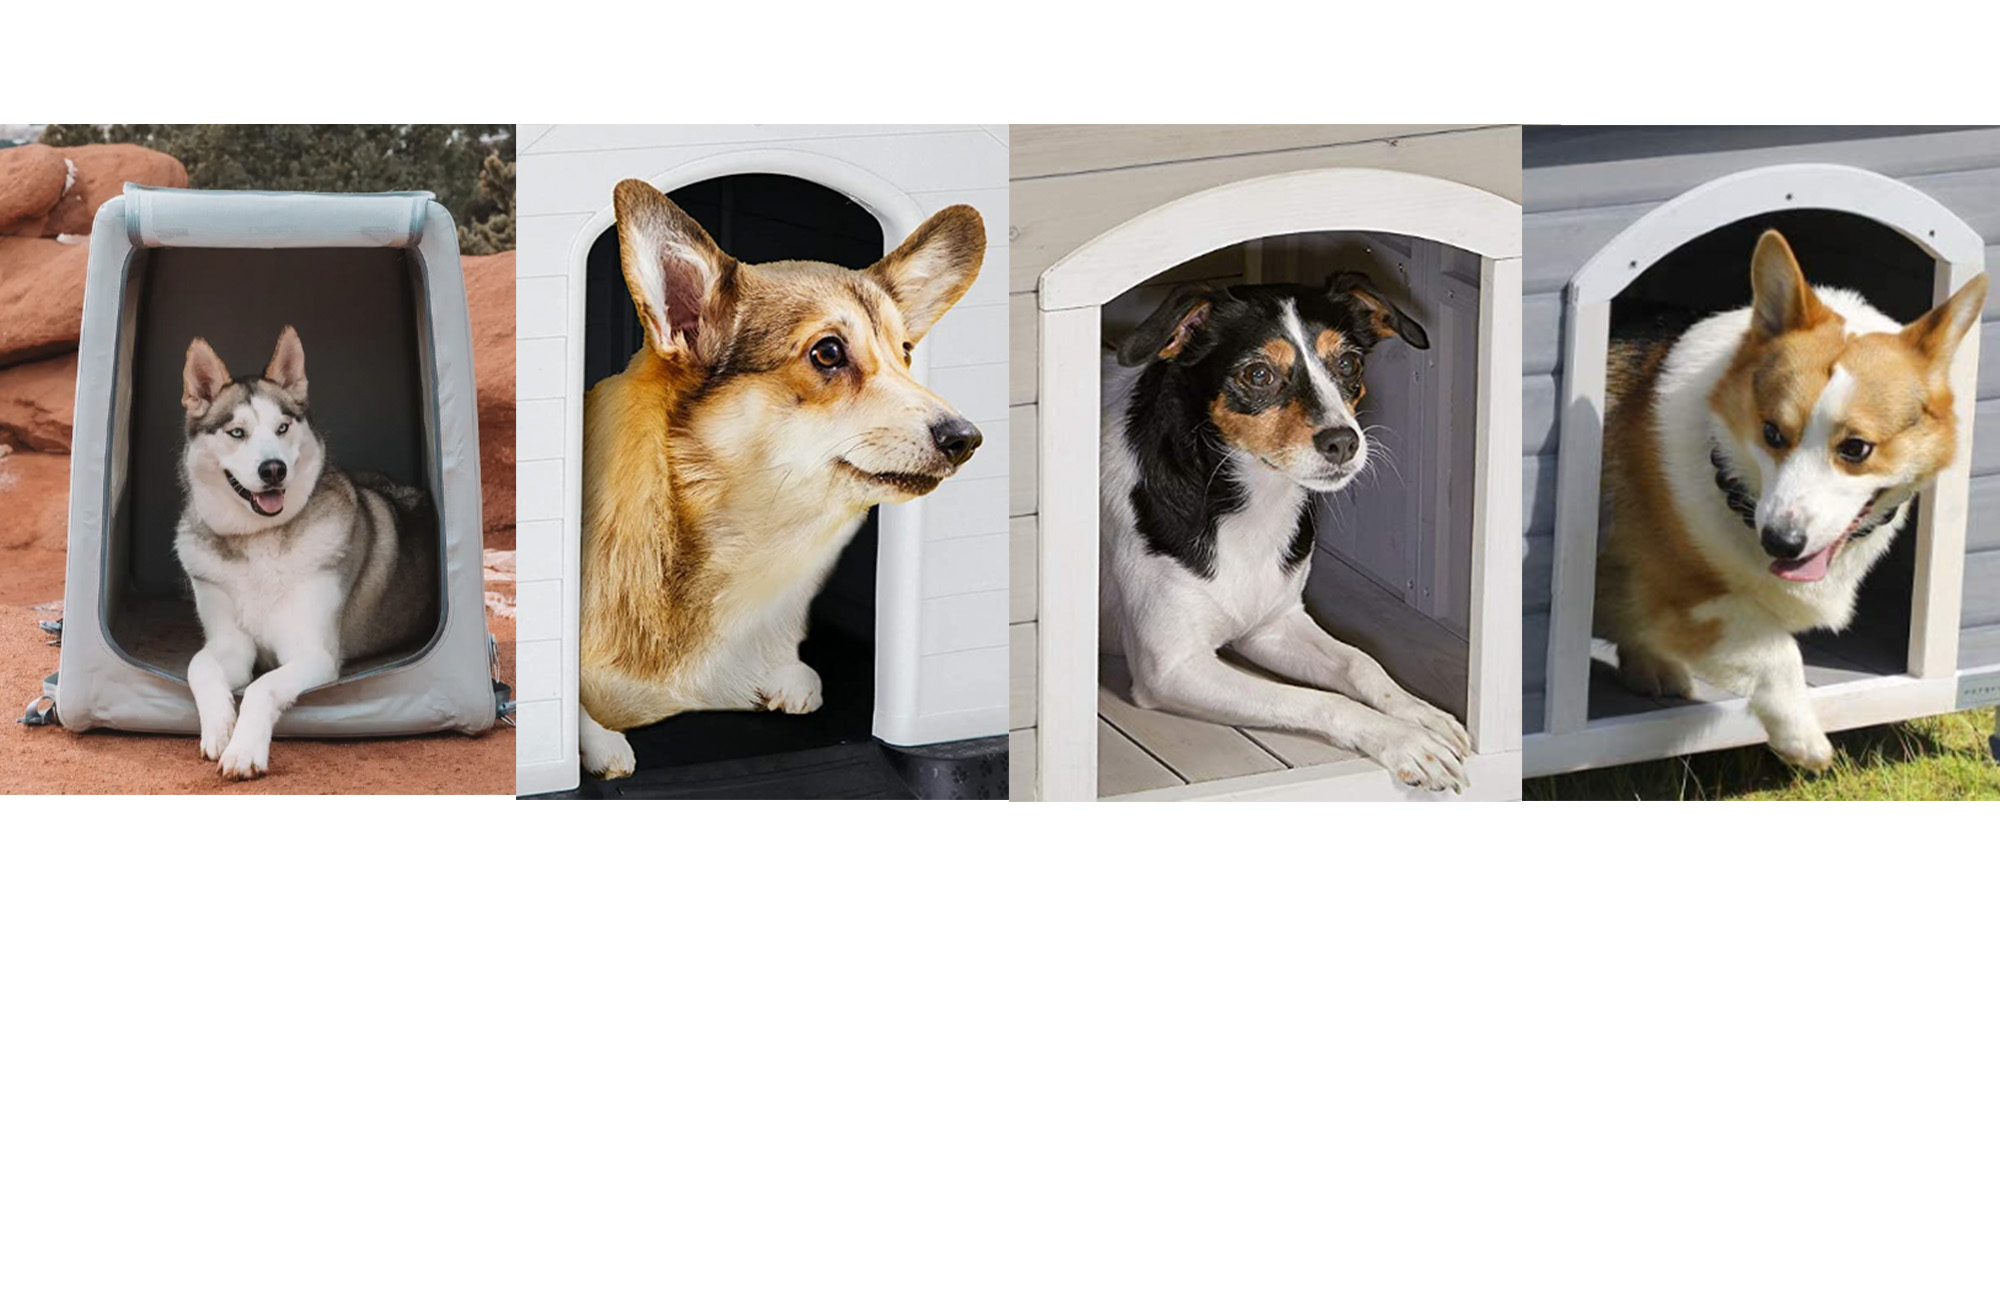 Keep your pooch warm and safe in one of the best dog houses.